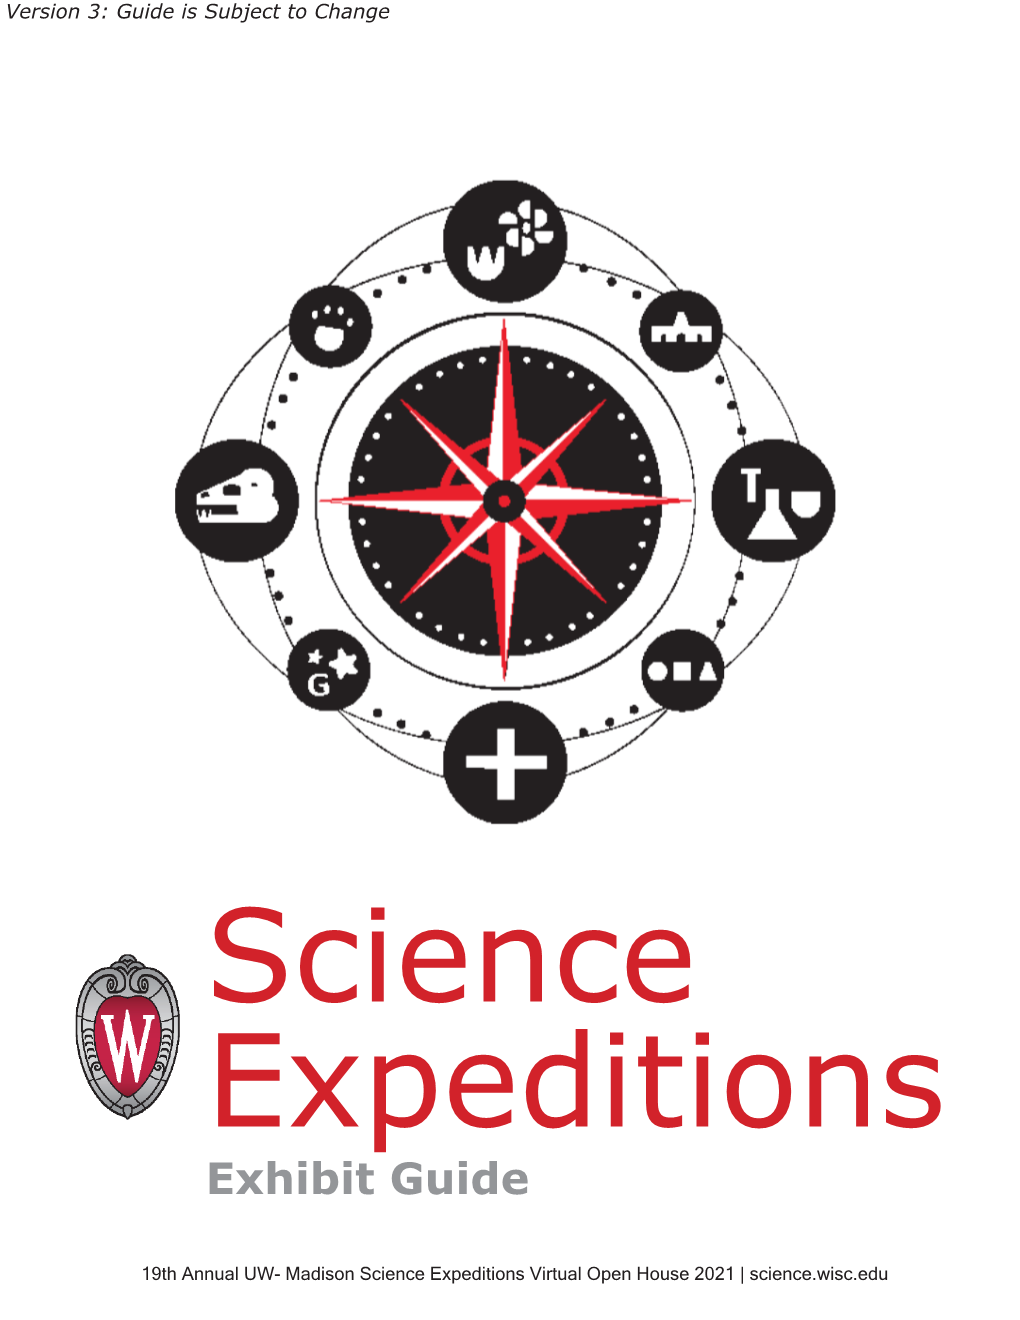 Expeditions Guide